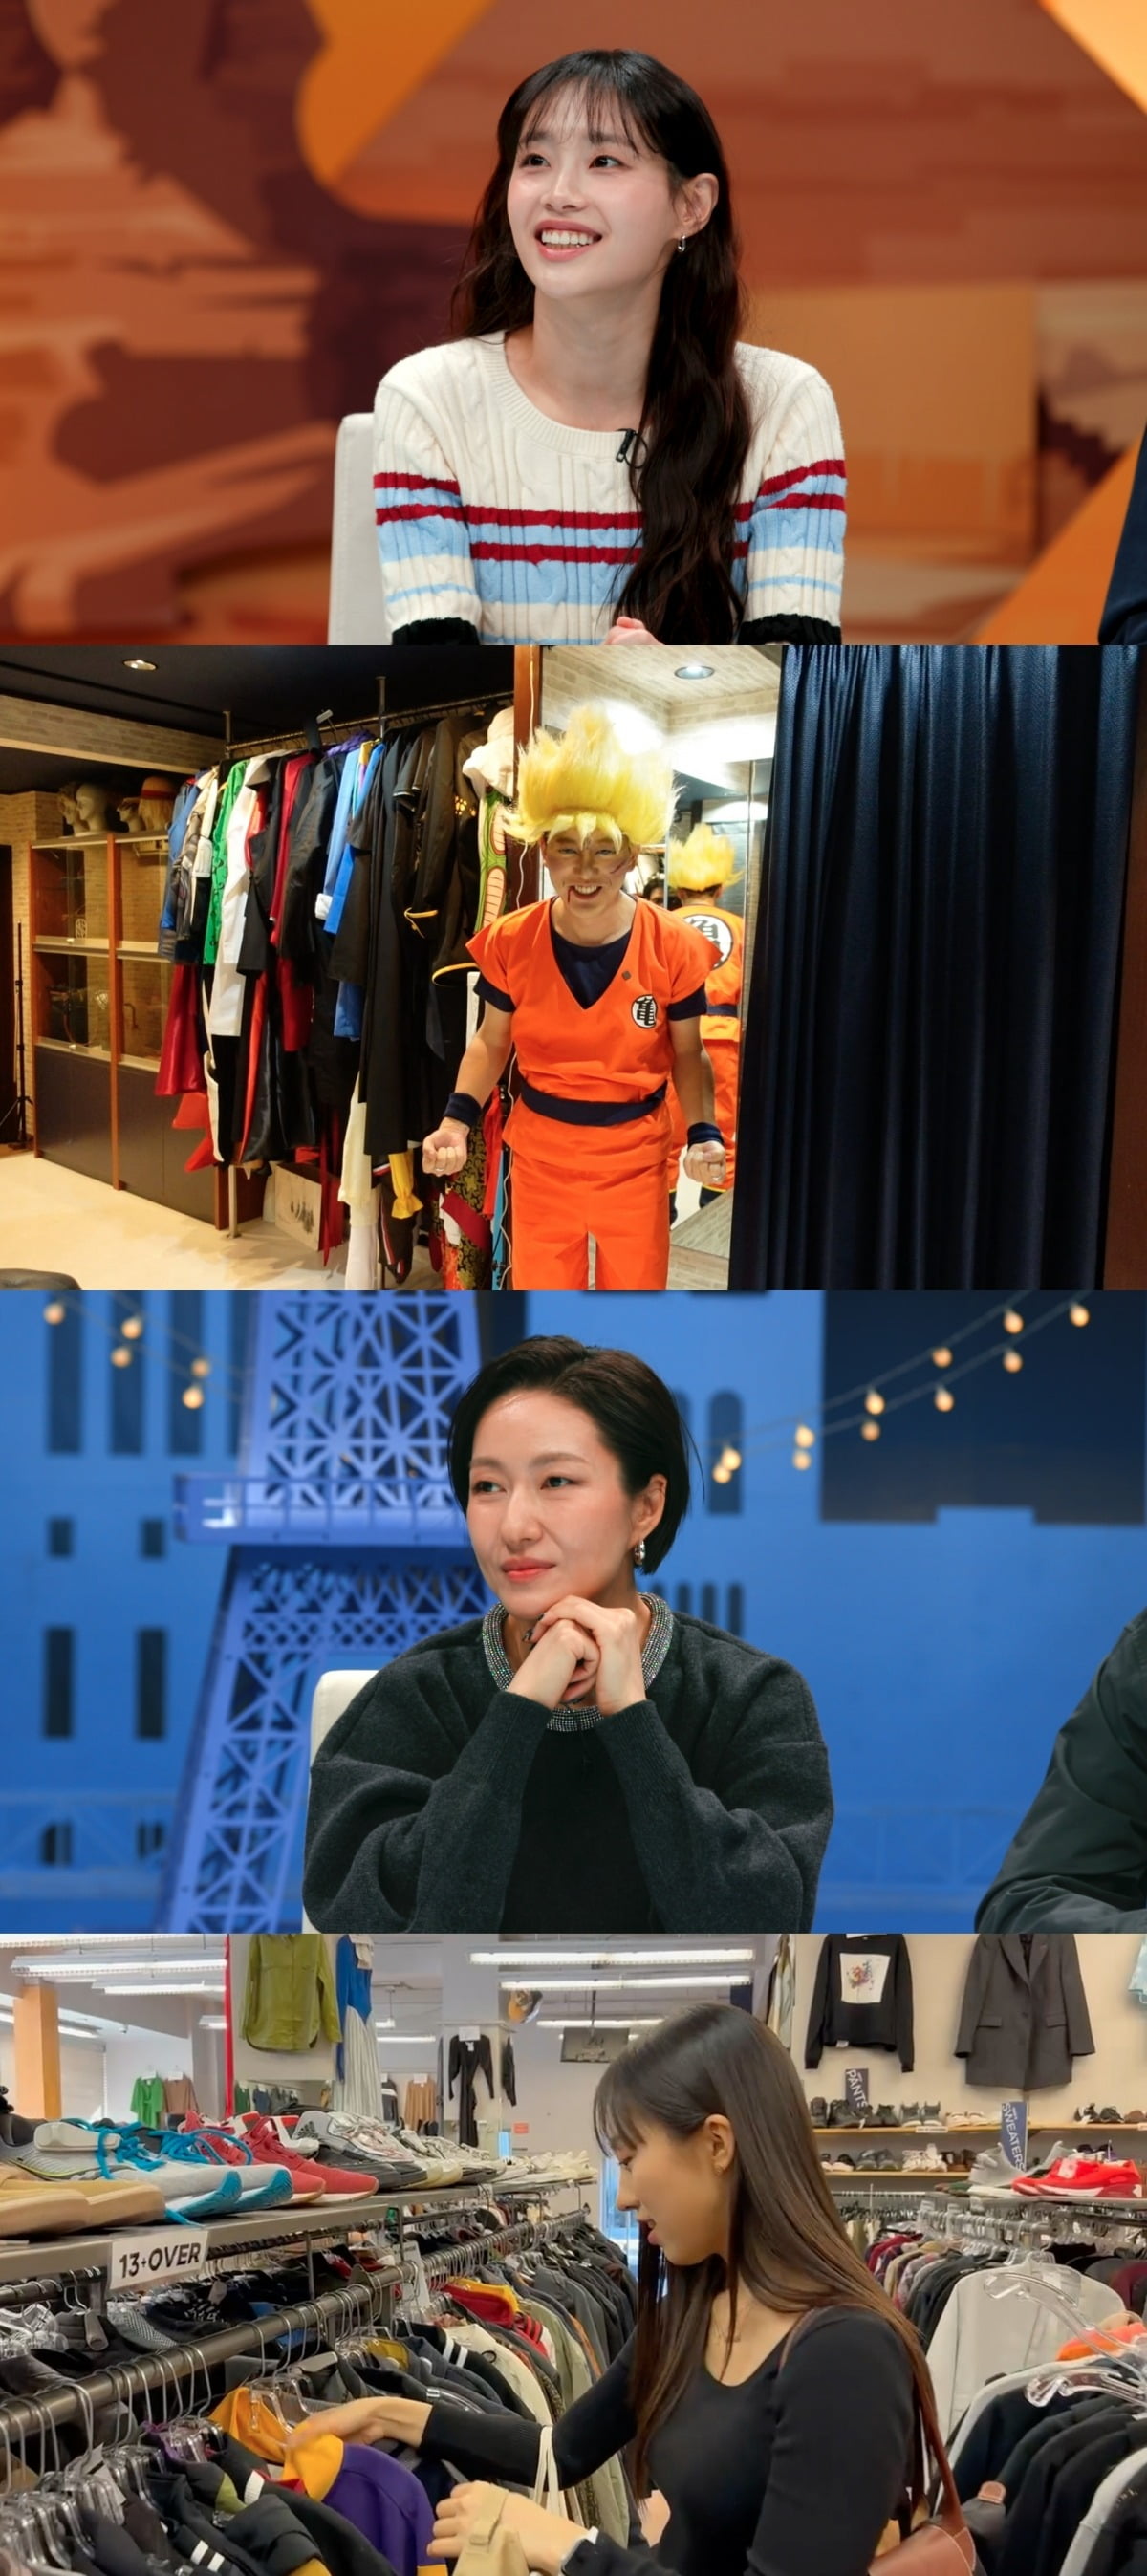 Jeon Hyun-moo suffered the humiliation of being selected as the worst dressed person.